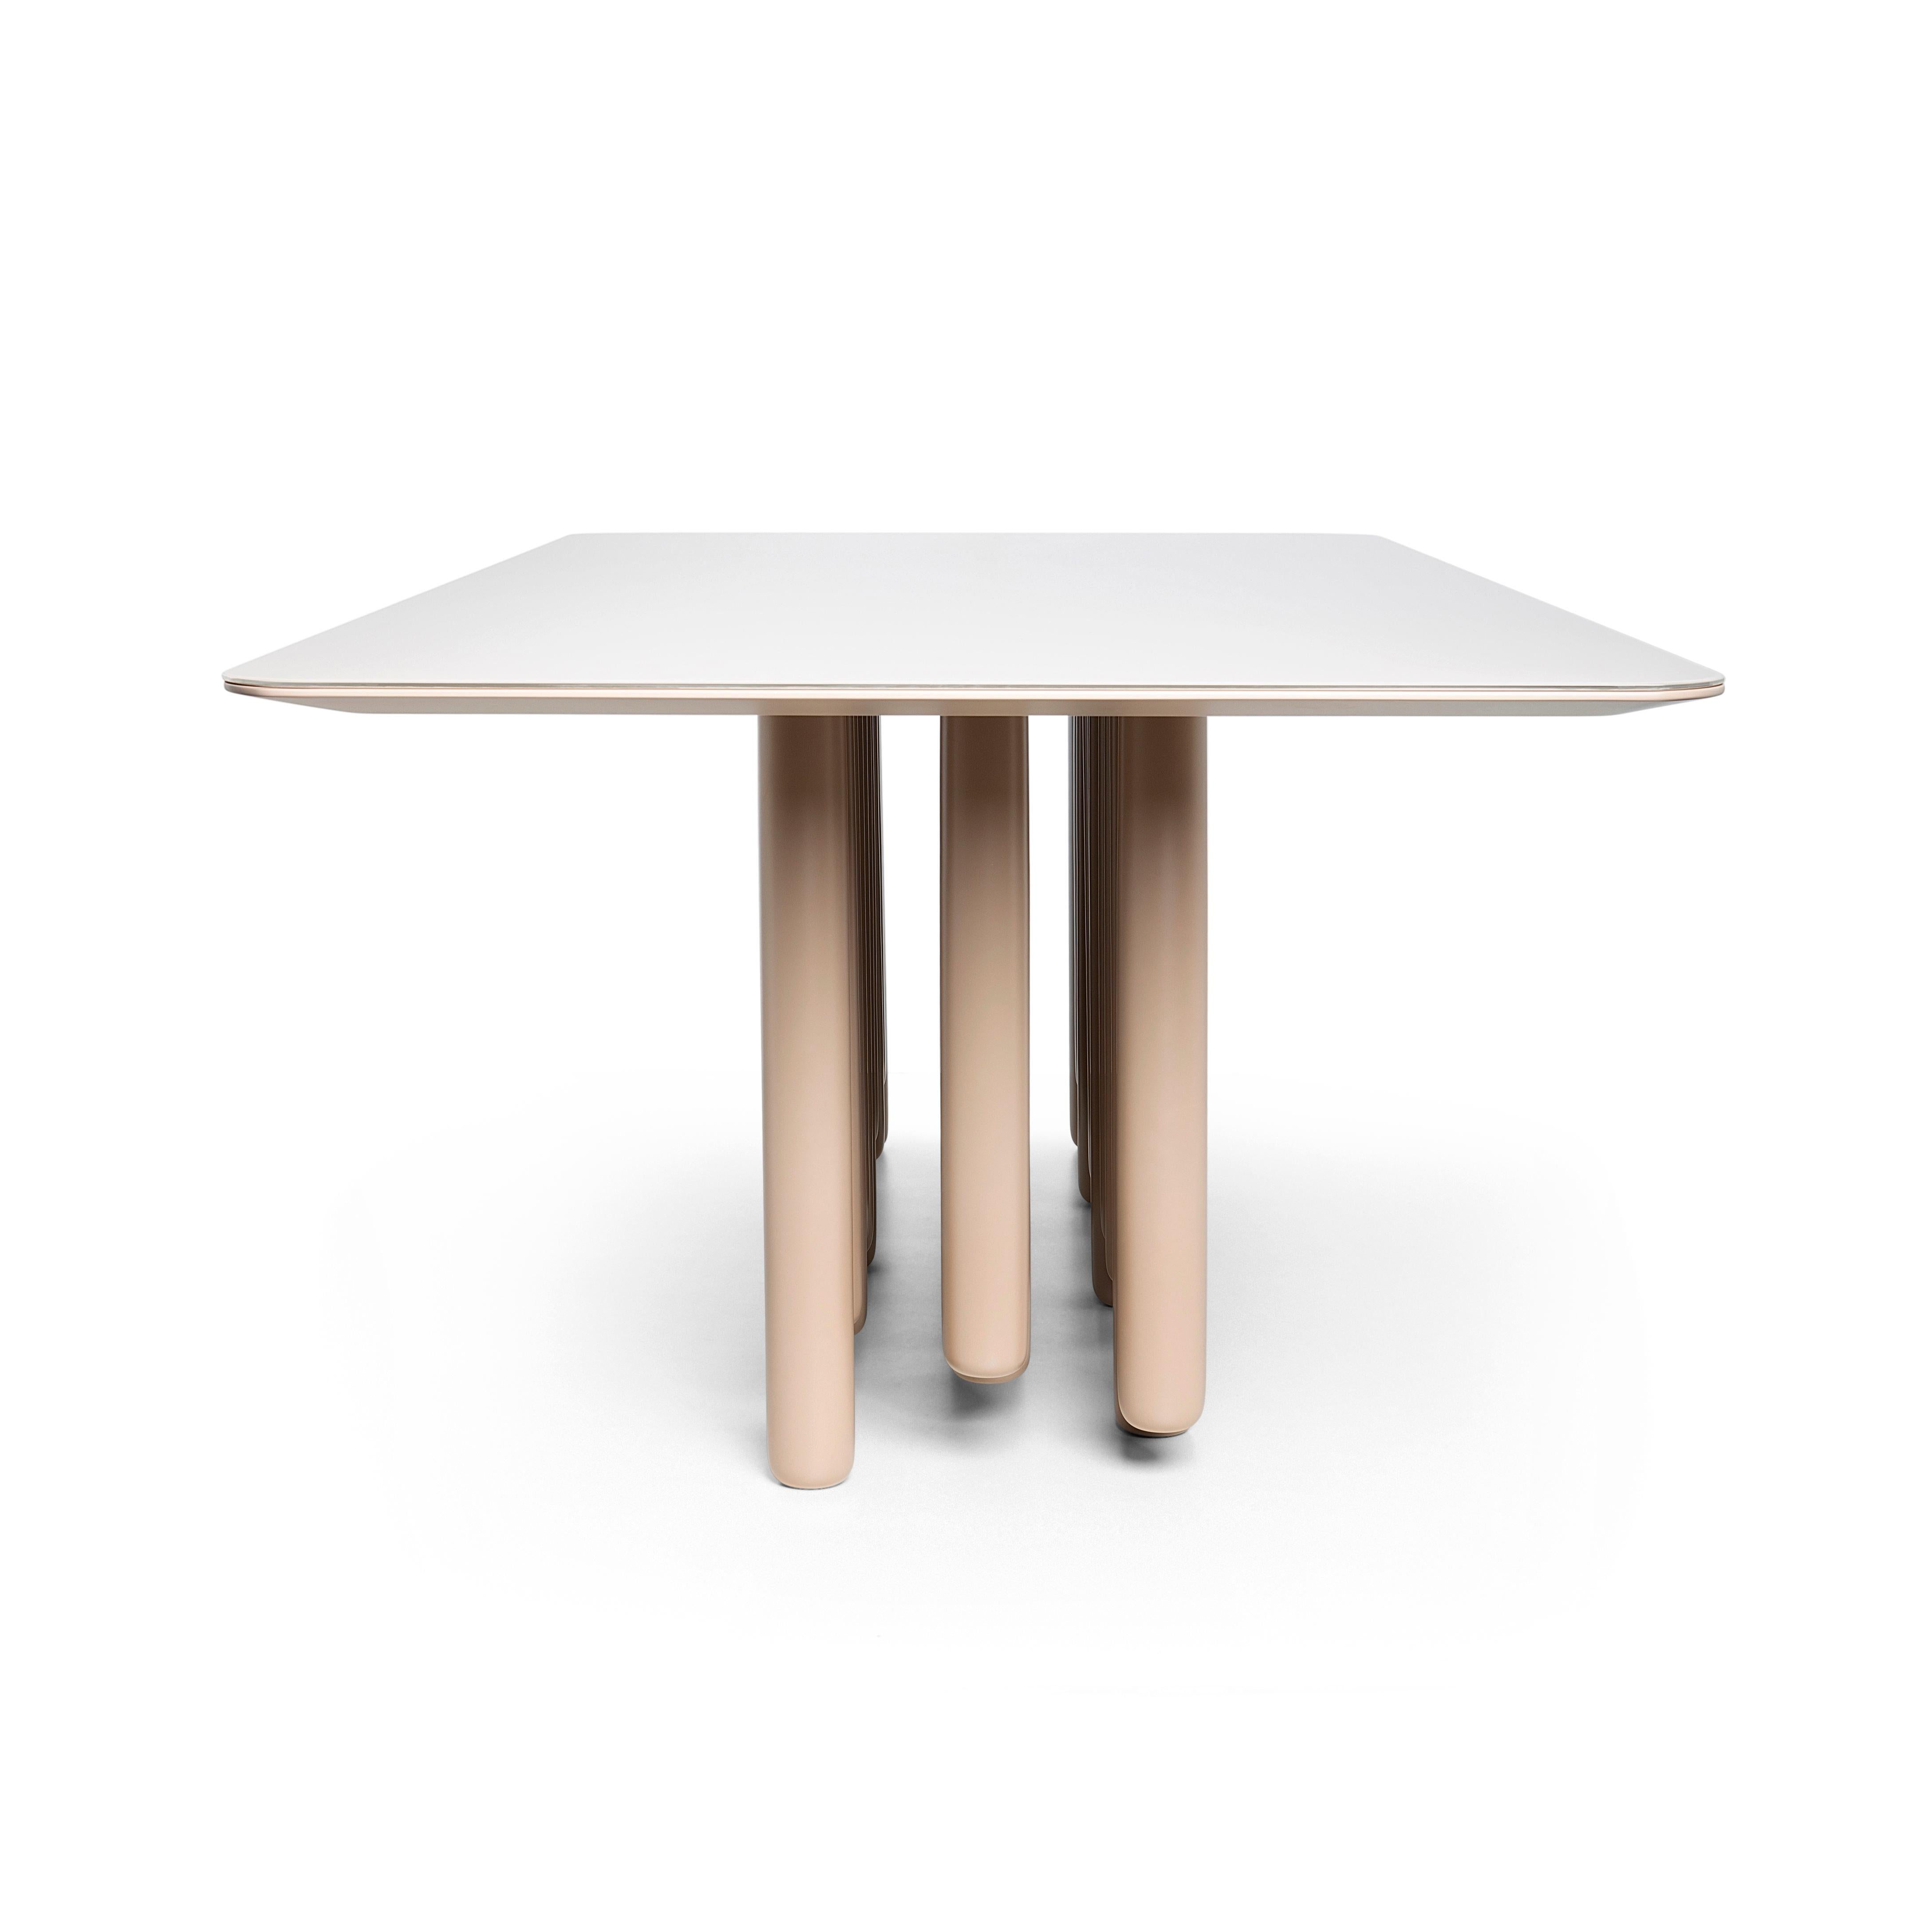 Manô Dining Table.
Base made of solid wood with a satin-finished Fendi lacquer painting.
Tabletop made of wood with a satin-finished Fendi lacquer painting, complemented by a 10mm glass painted in Fendi color.

The Manô Dining Table is an artistic